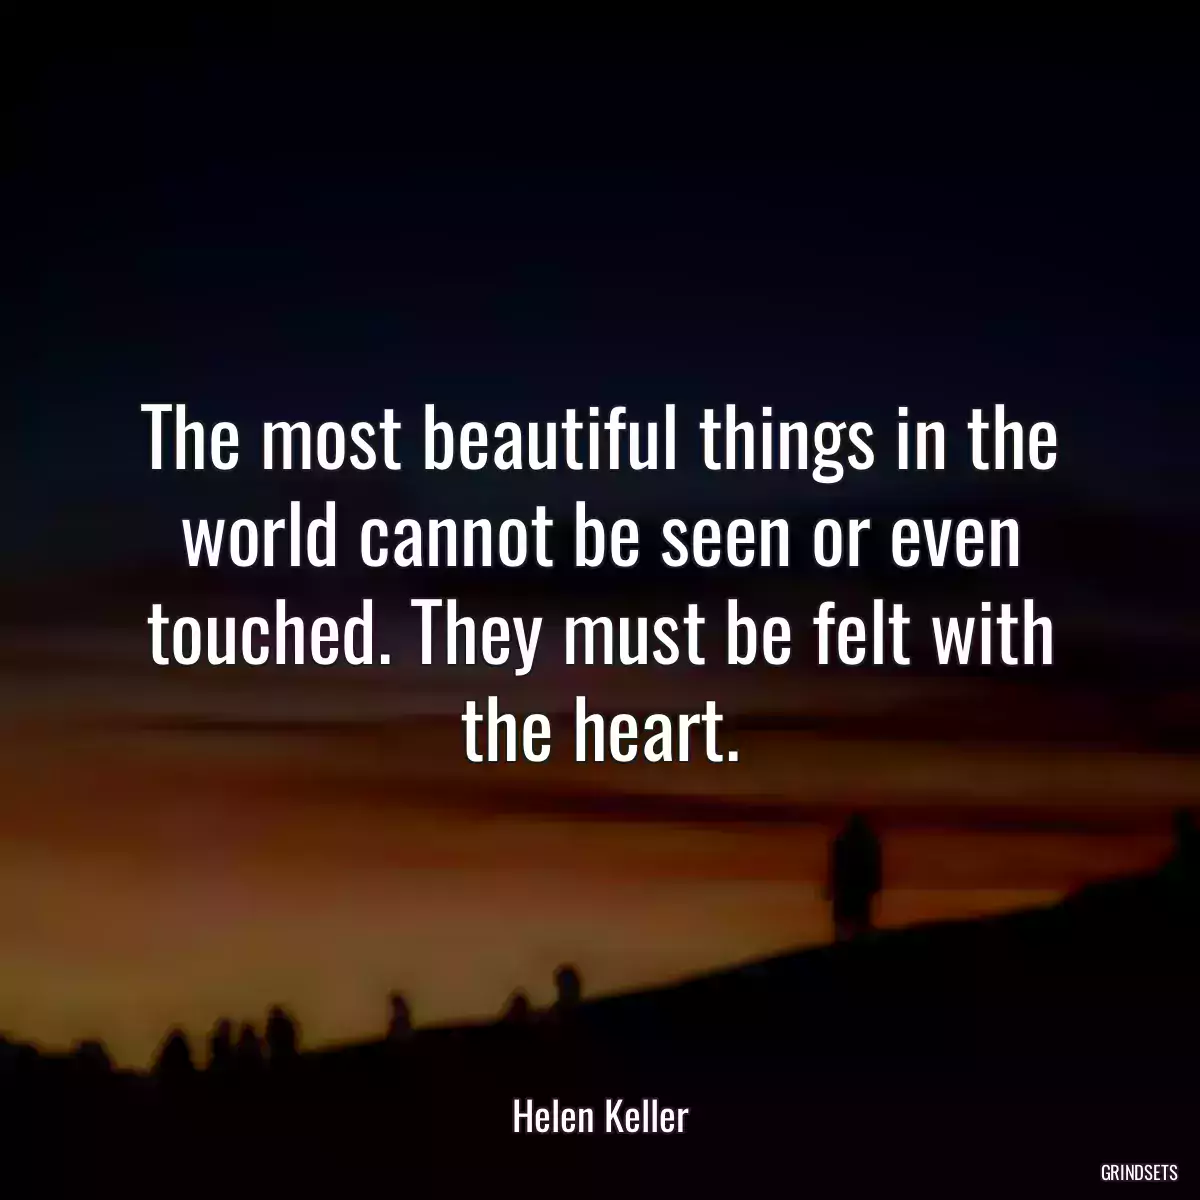 The most beautiful things in the world cannot be seen or even touched. They must be felt with the heart.